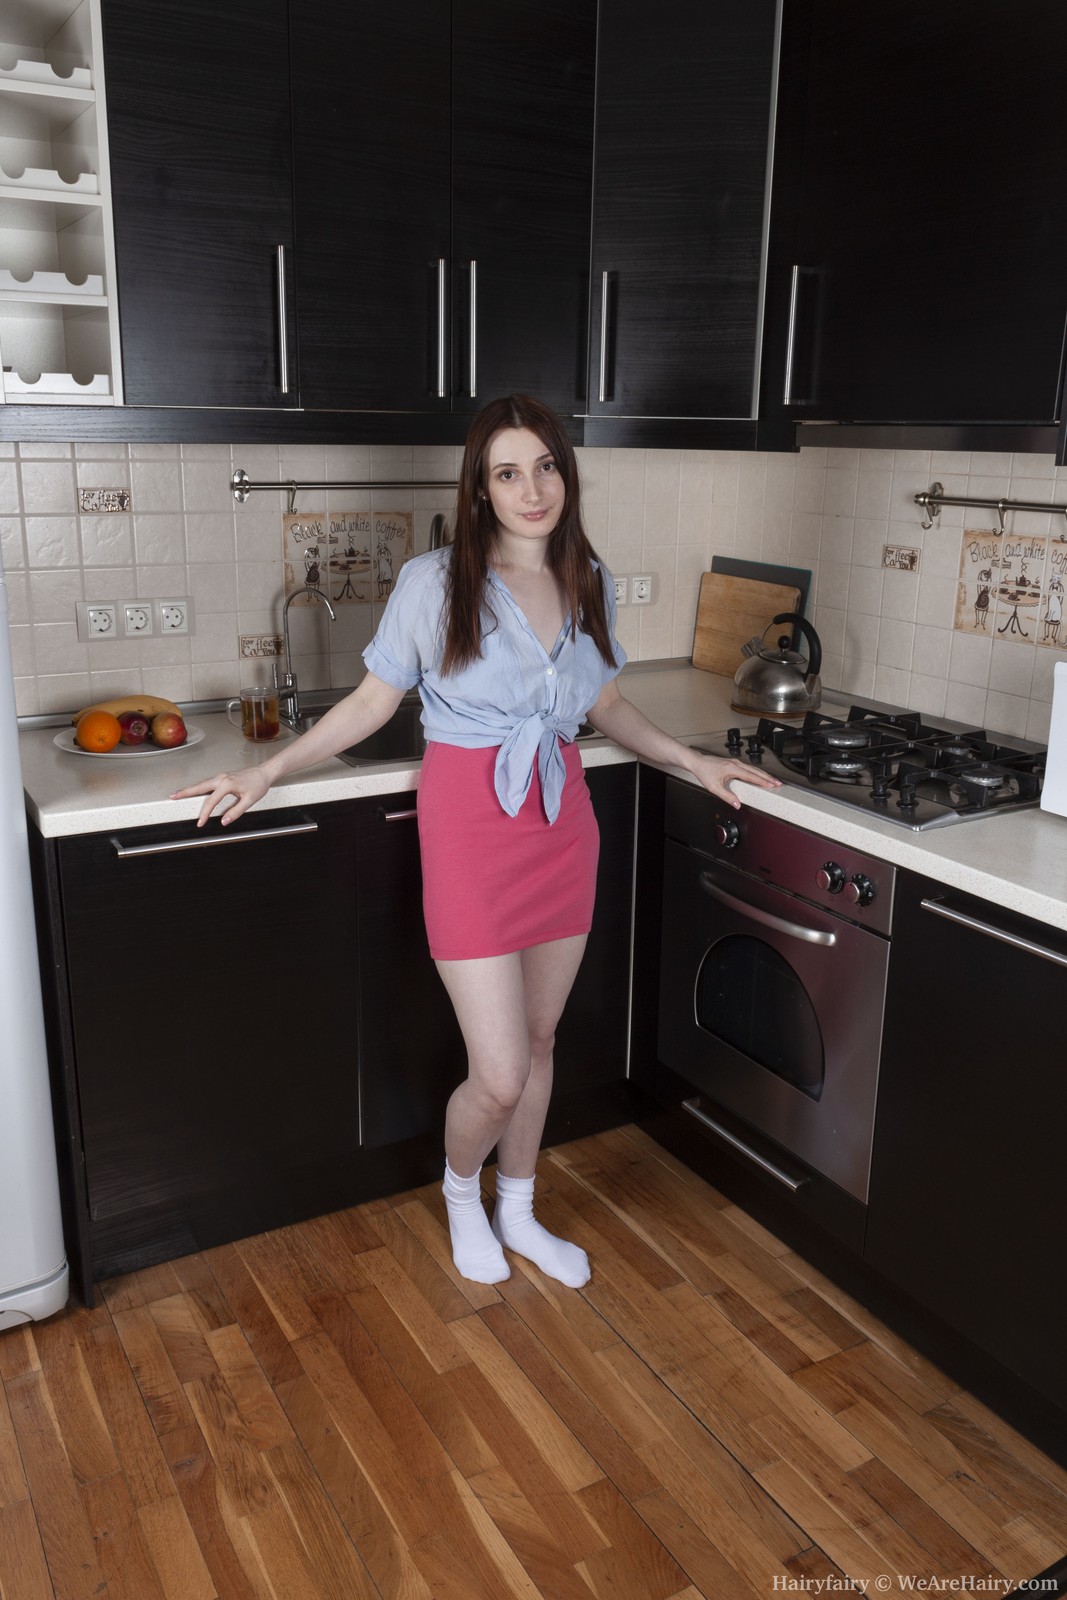 Hairyfairy Poses Naked While In Her Kitchen